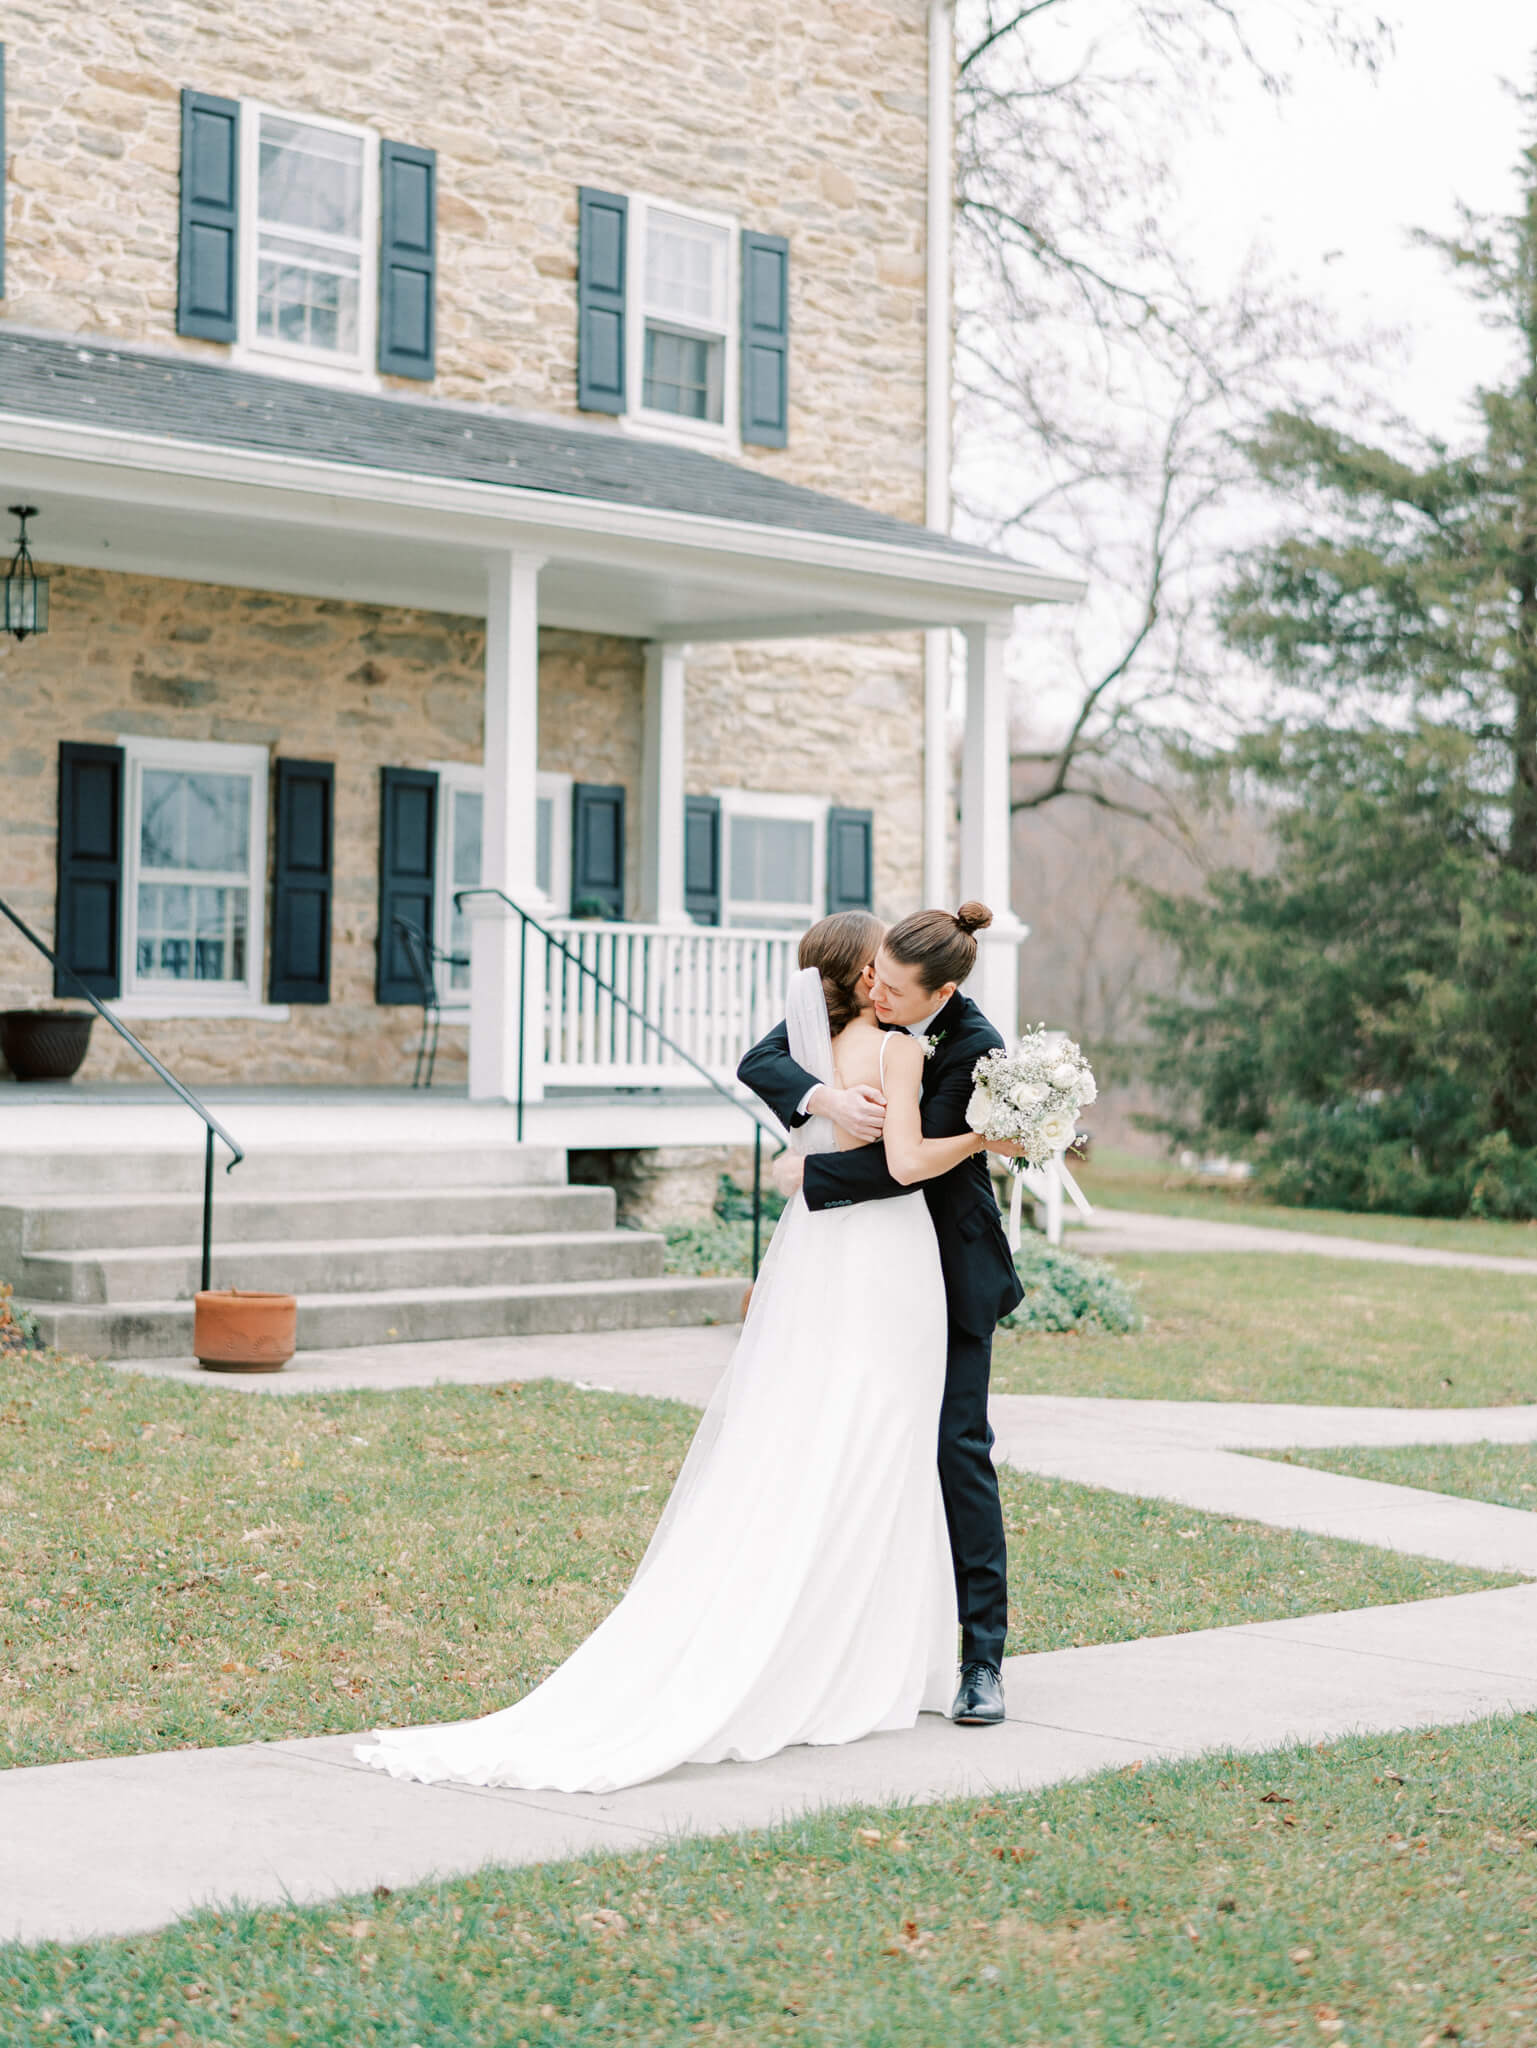 A groom embracing his bride during their first look in front of Springfield Manor.